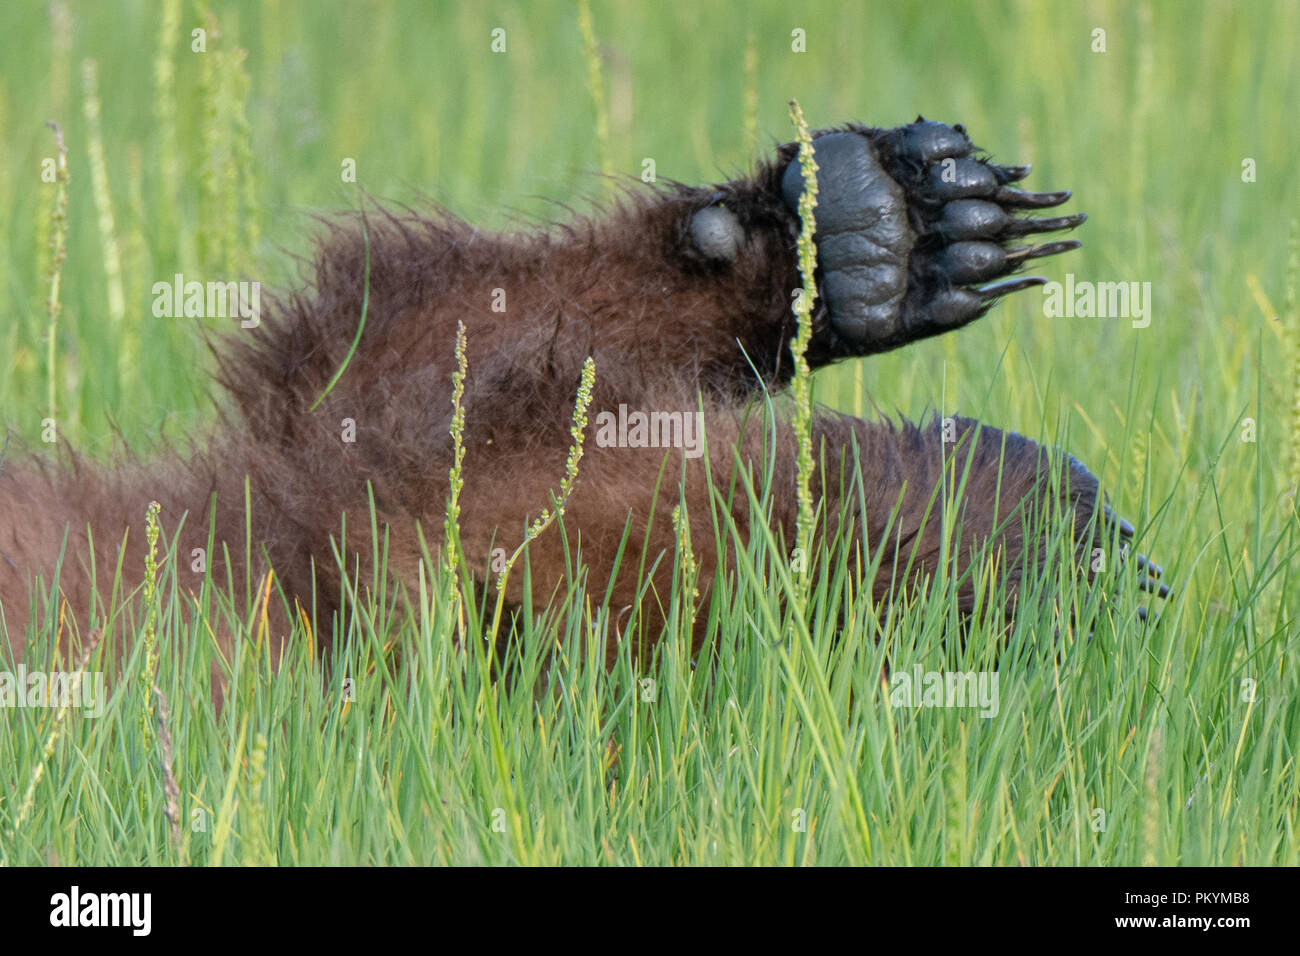 Claose up view of paw and claws of a Coastal Brown Bear cub (Ursus arctos) lying in grass in the Lake Clark National Park, Alaska Stock Photo